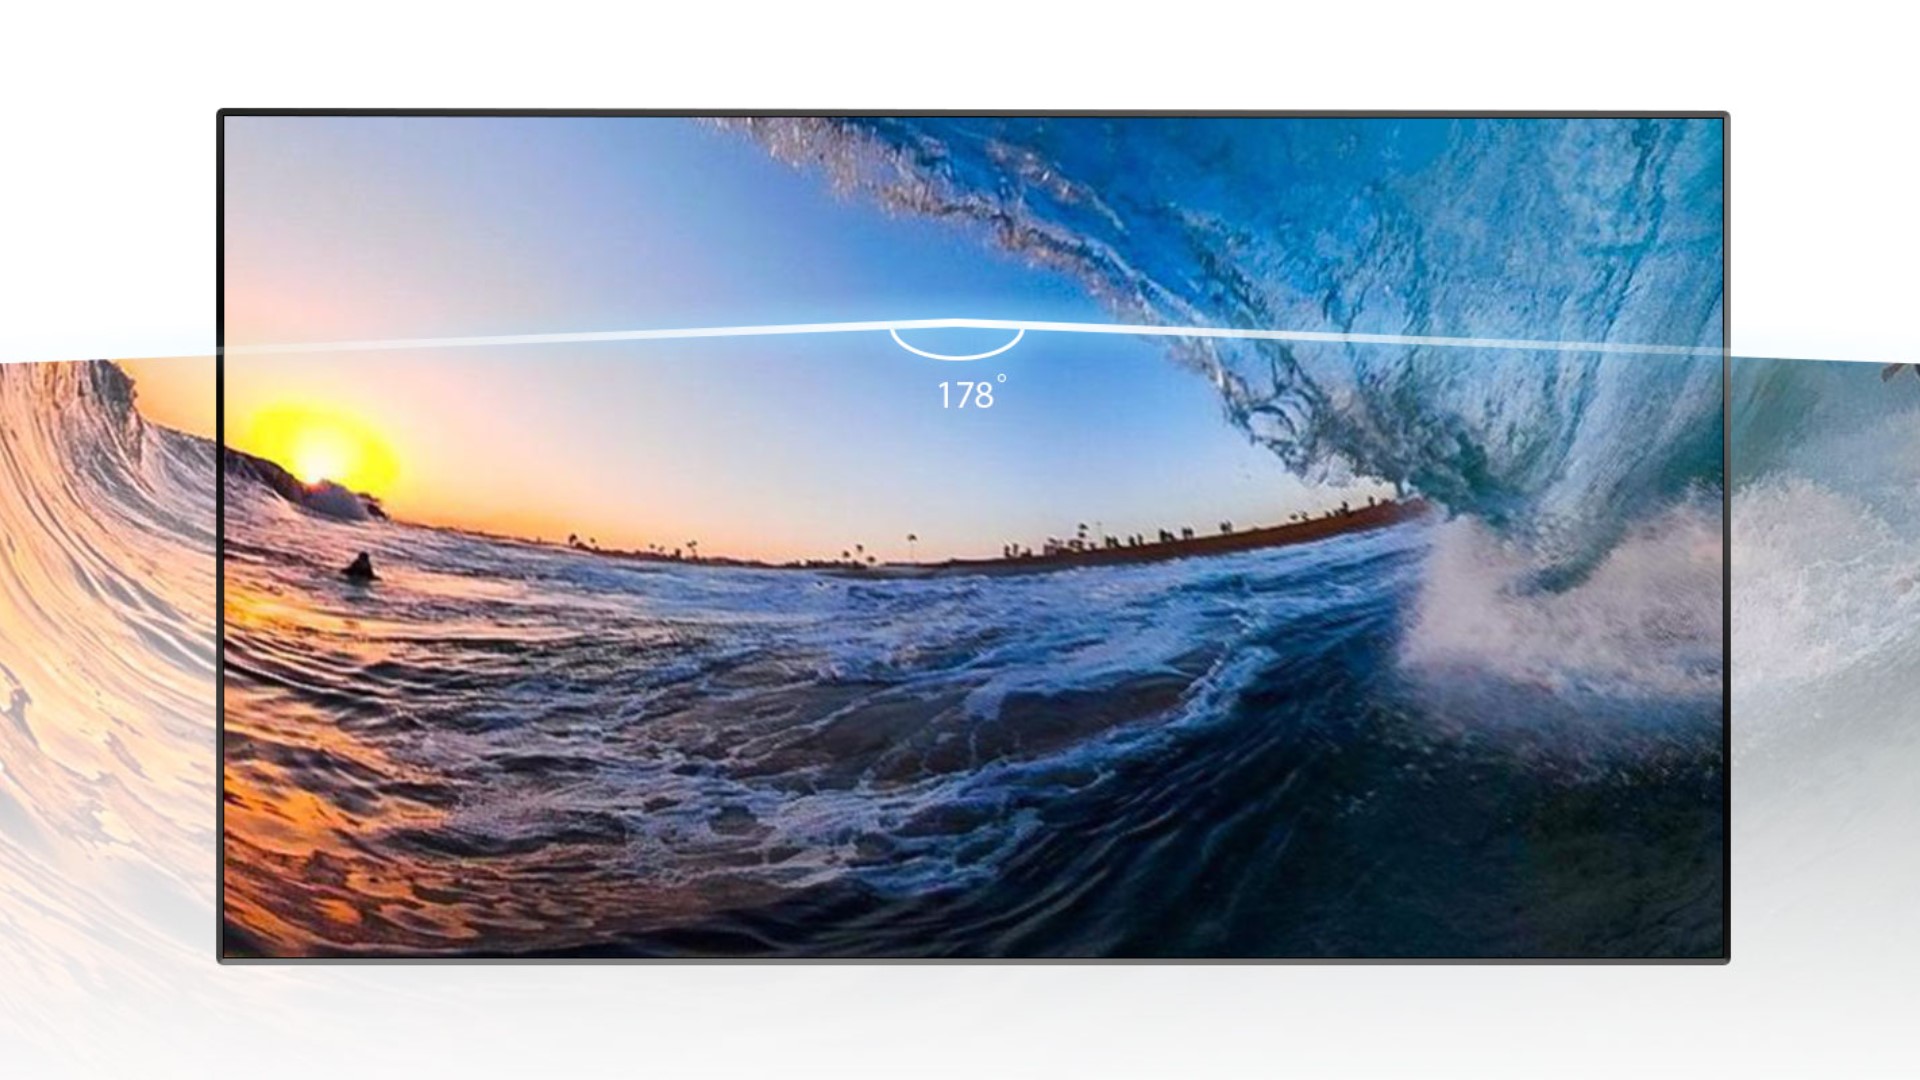 TCL Android tv S6500 wide viewing angle